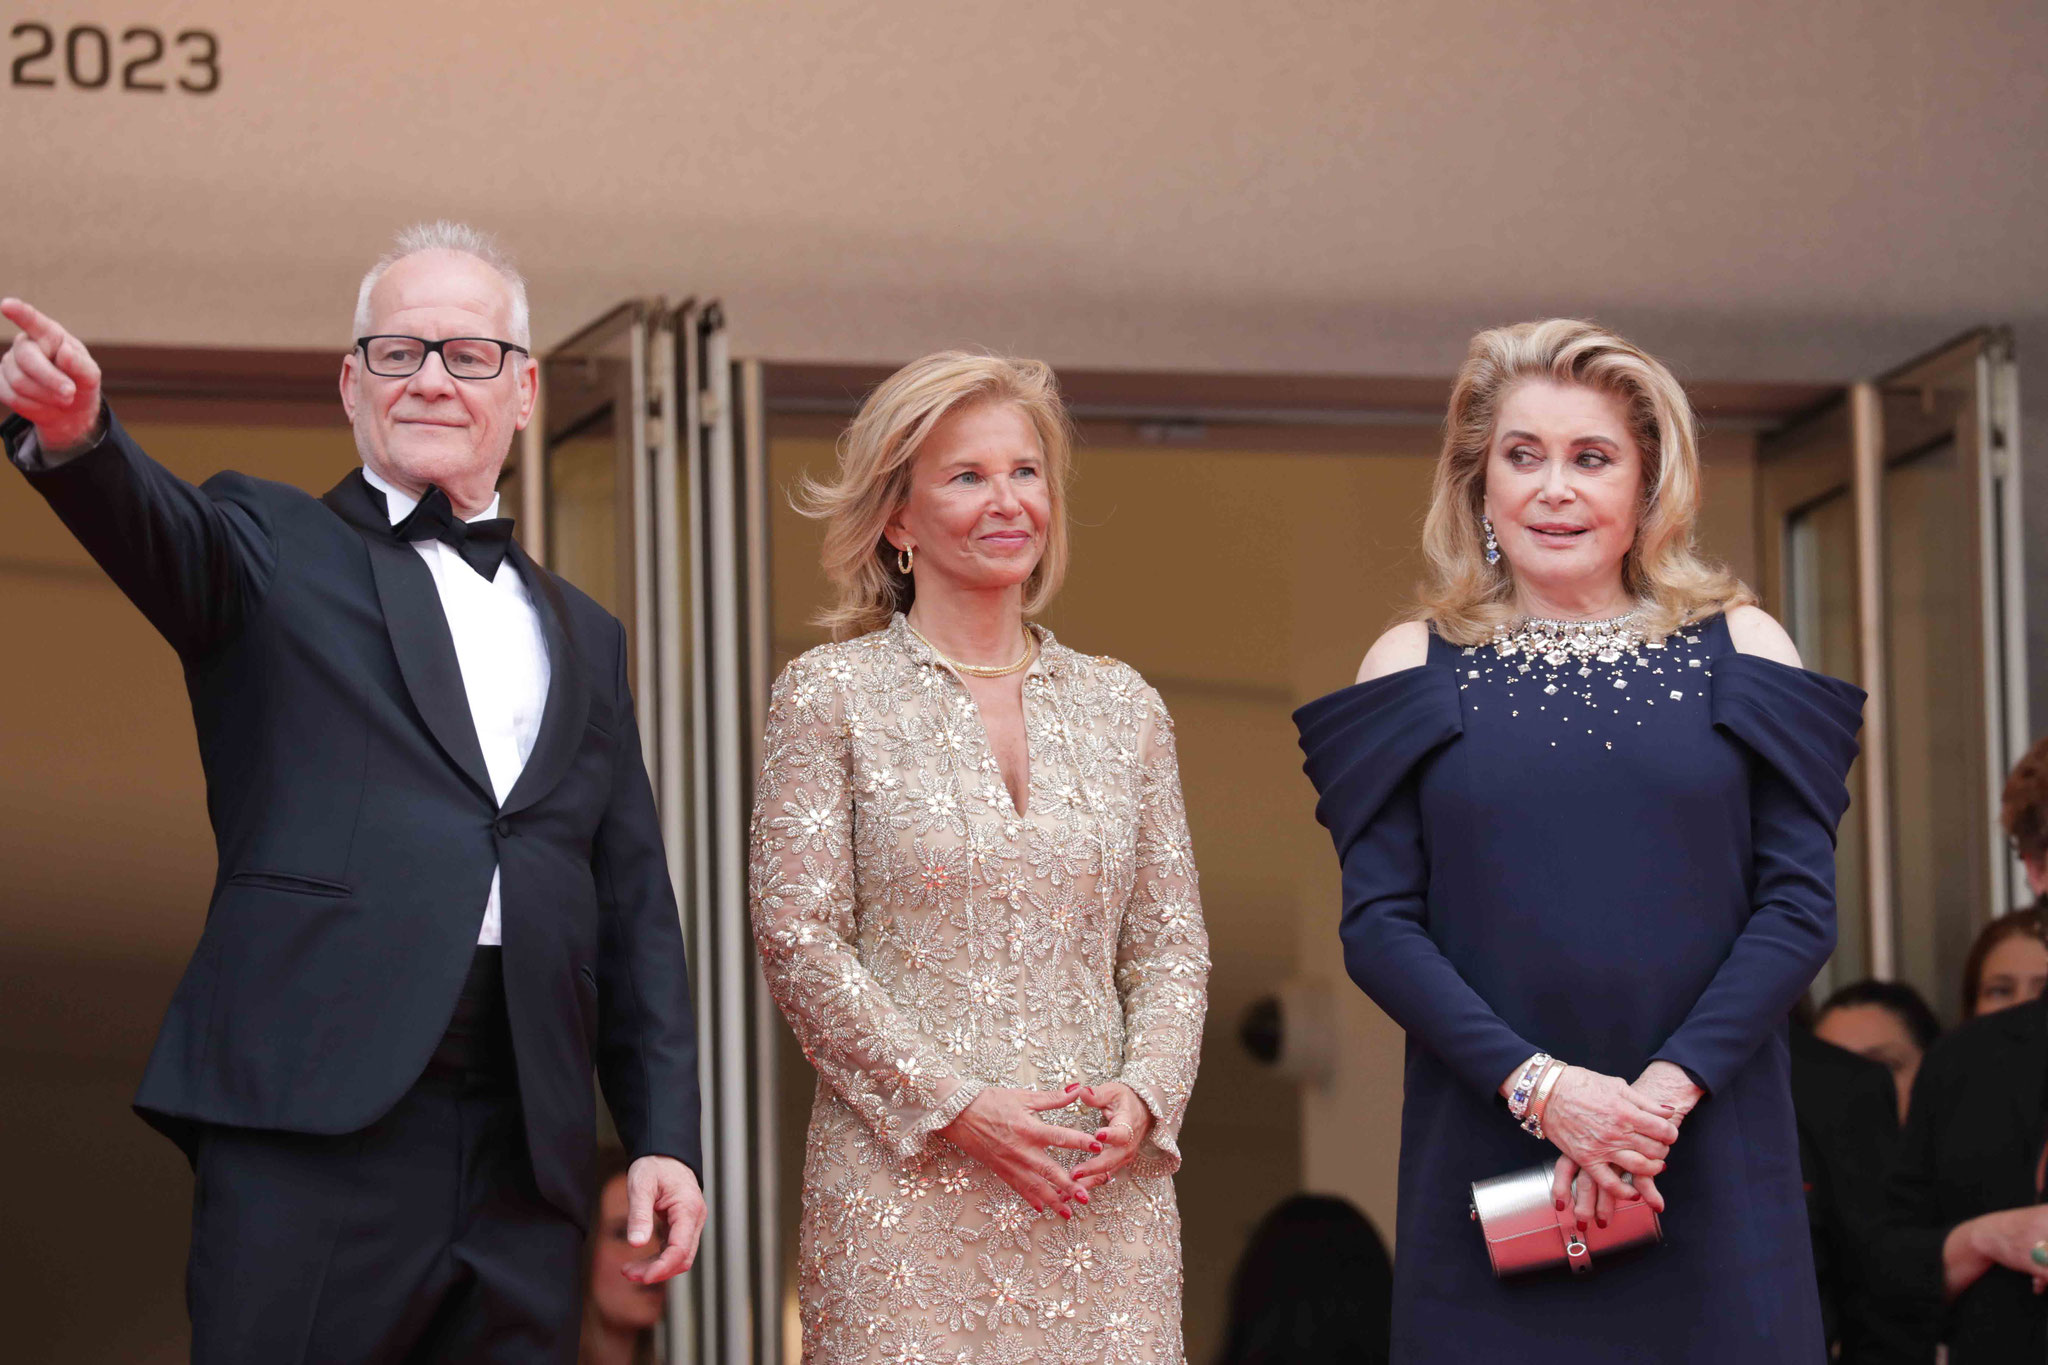 Thierry Fremaux, President of the International Cannes Film Festival Iris Knobloch and Catherine Deneuve.